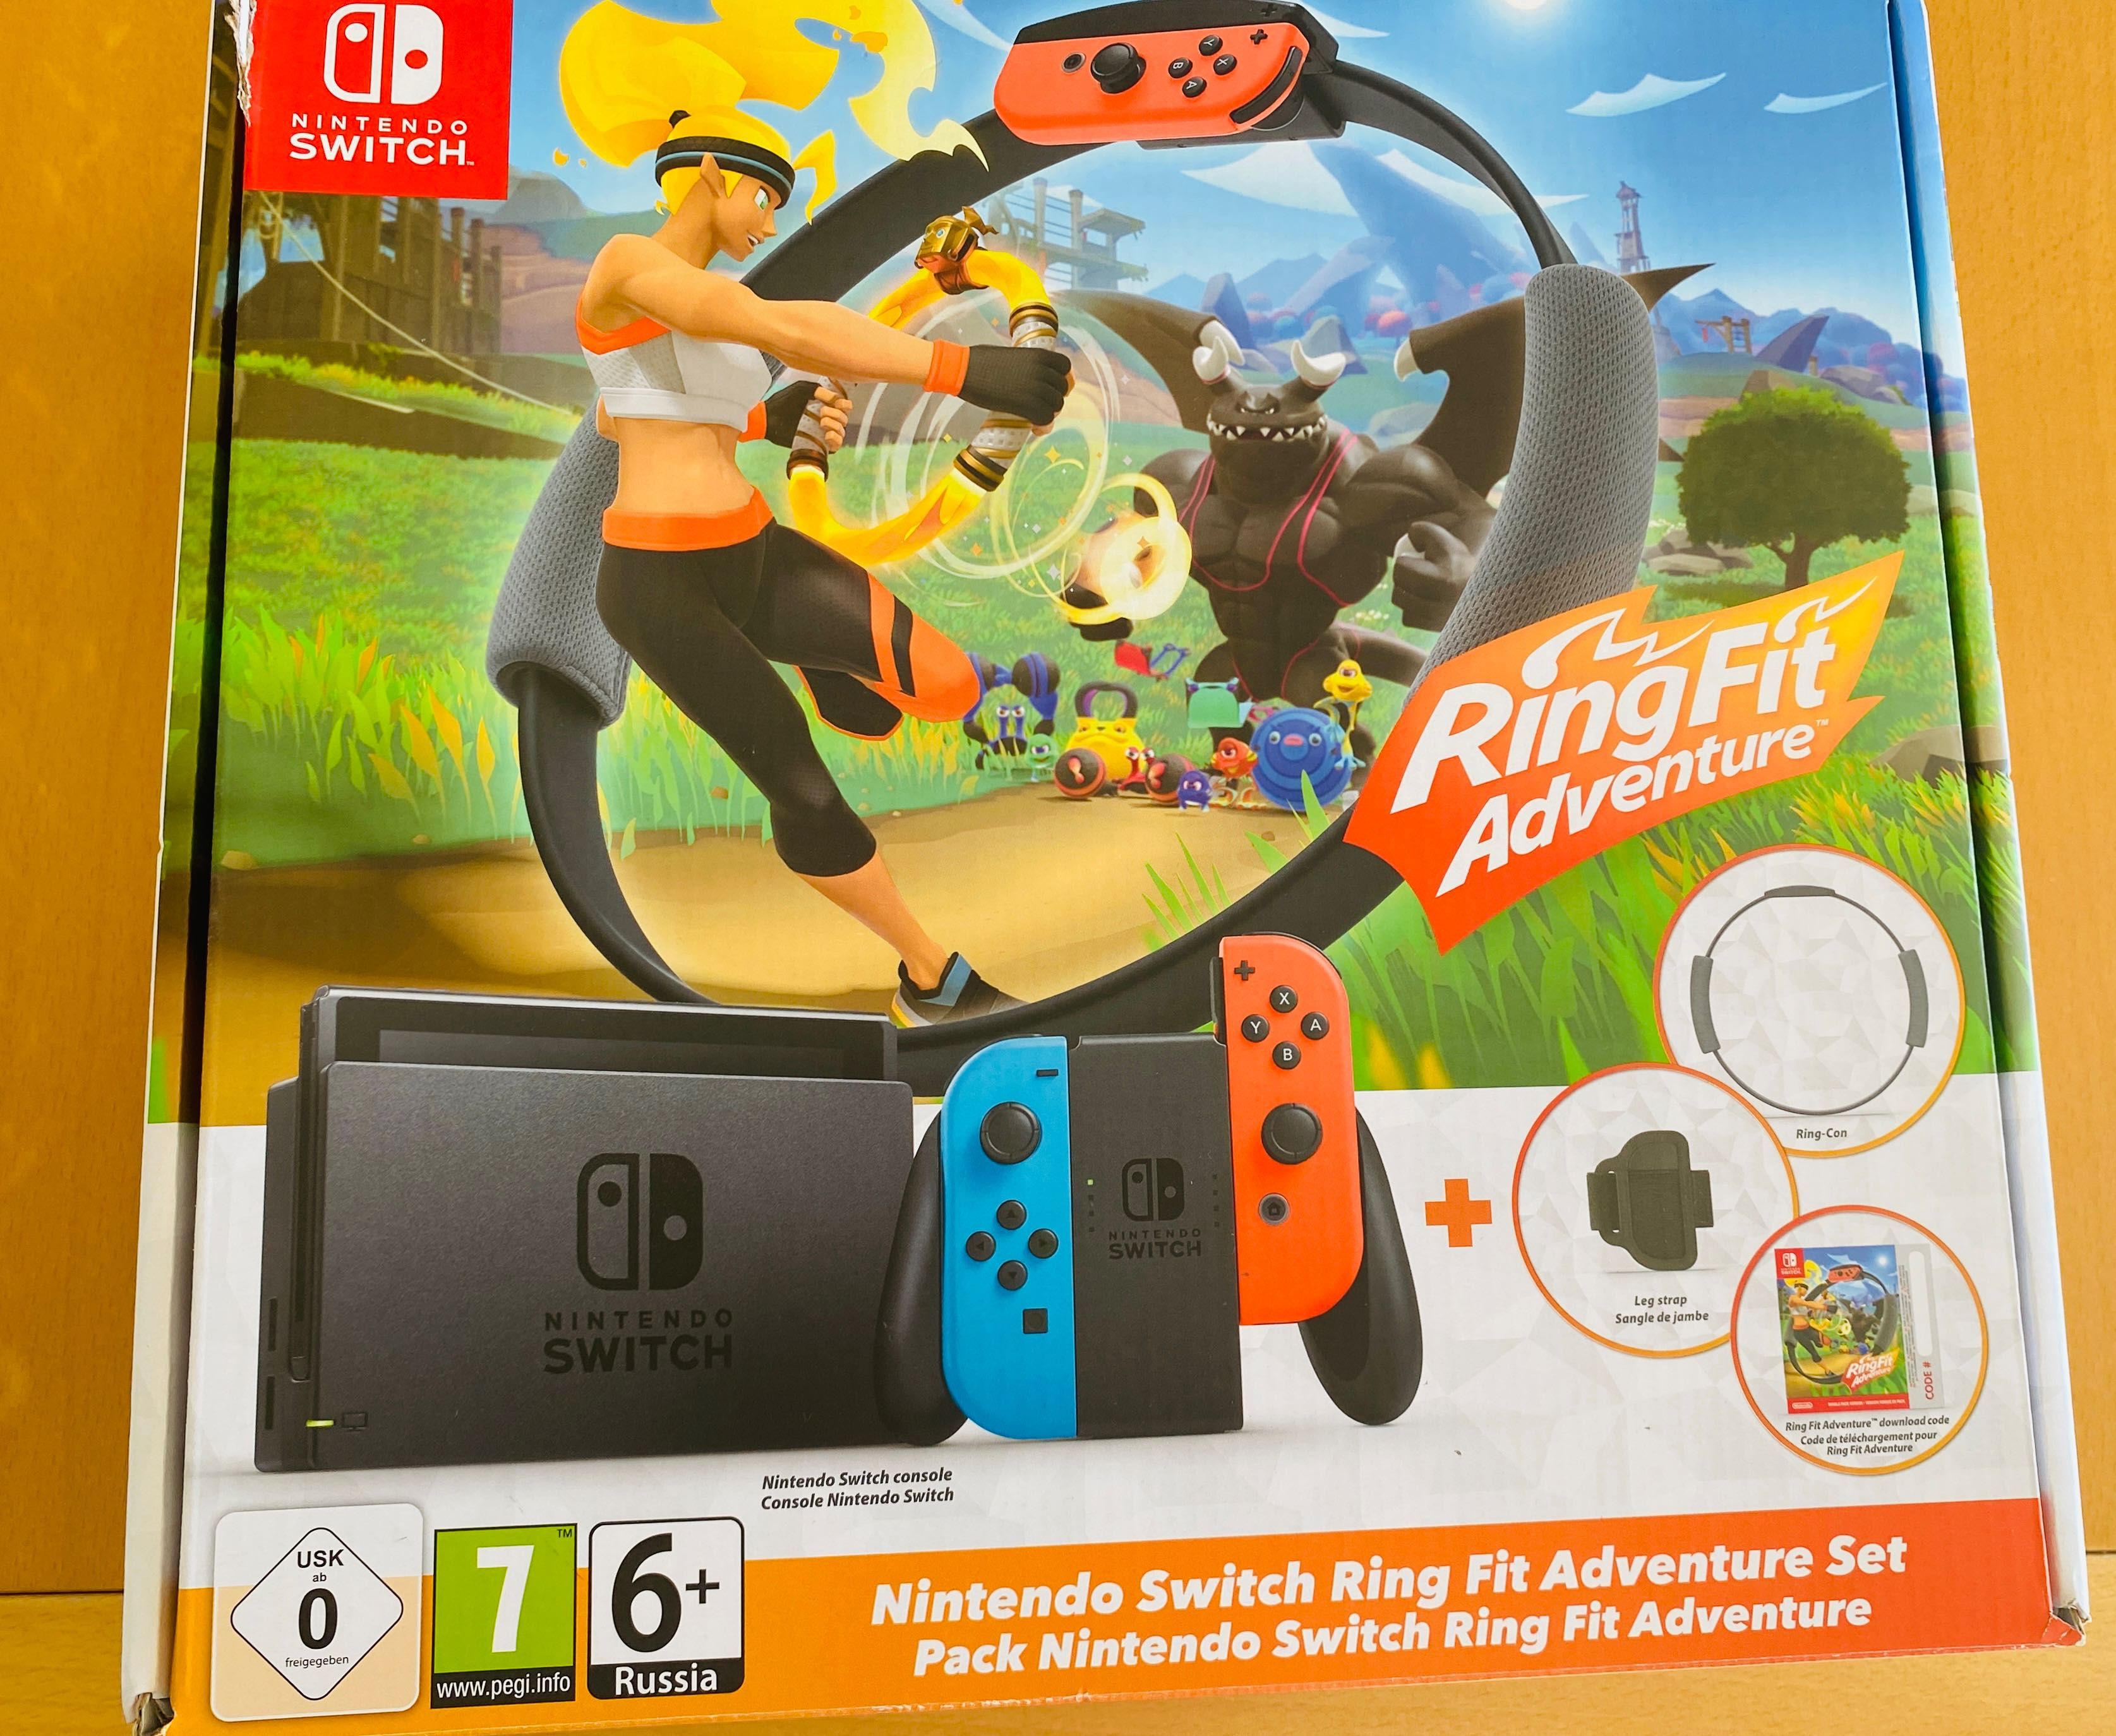 Consola Nintendo Switch + Ring Fit Adventure Pack